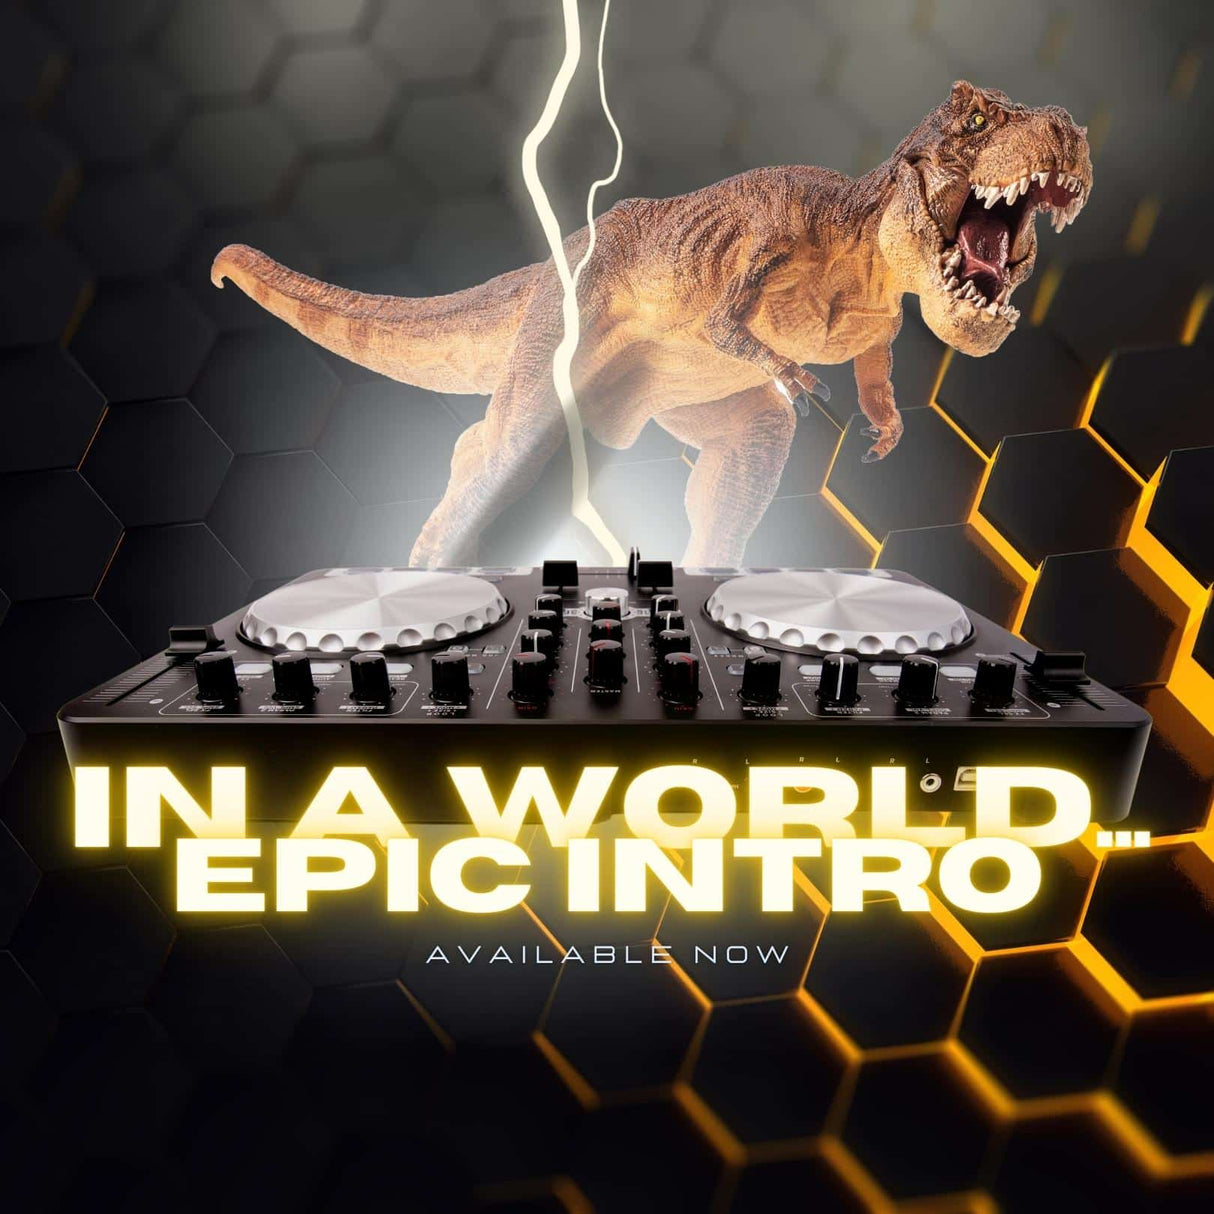 Epic DJ Intro "In a World"